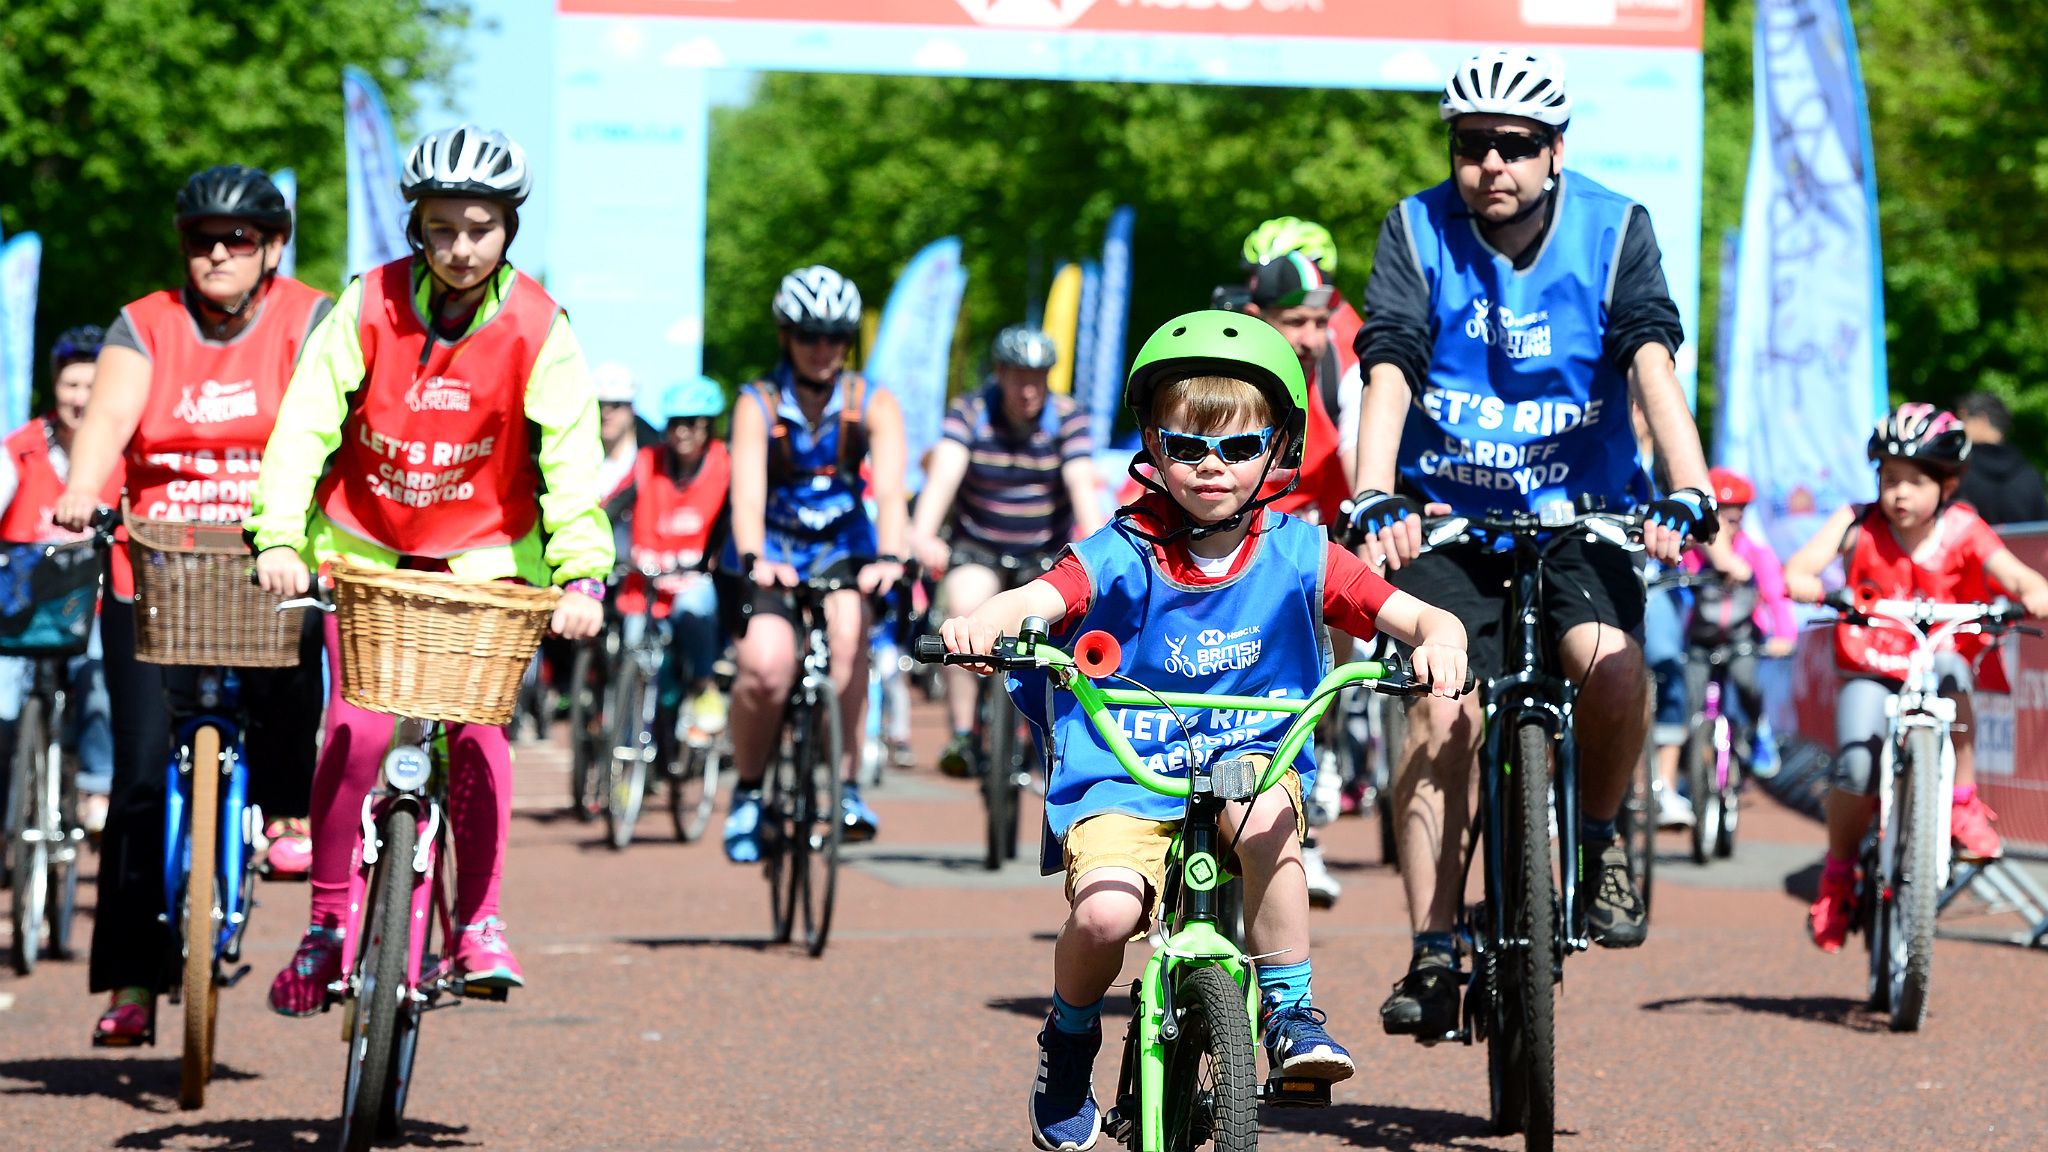 Cyclists enjoying the 2018 Let's Ride event in Cardiff